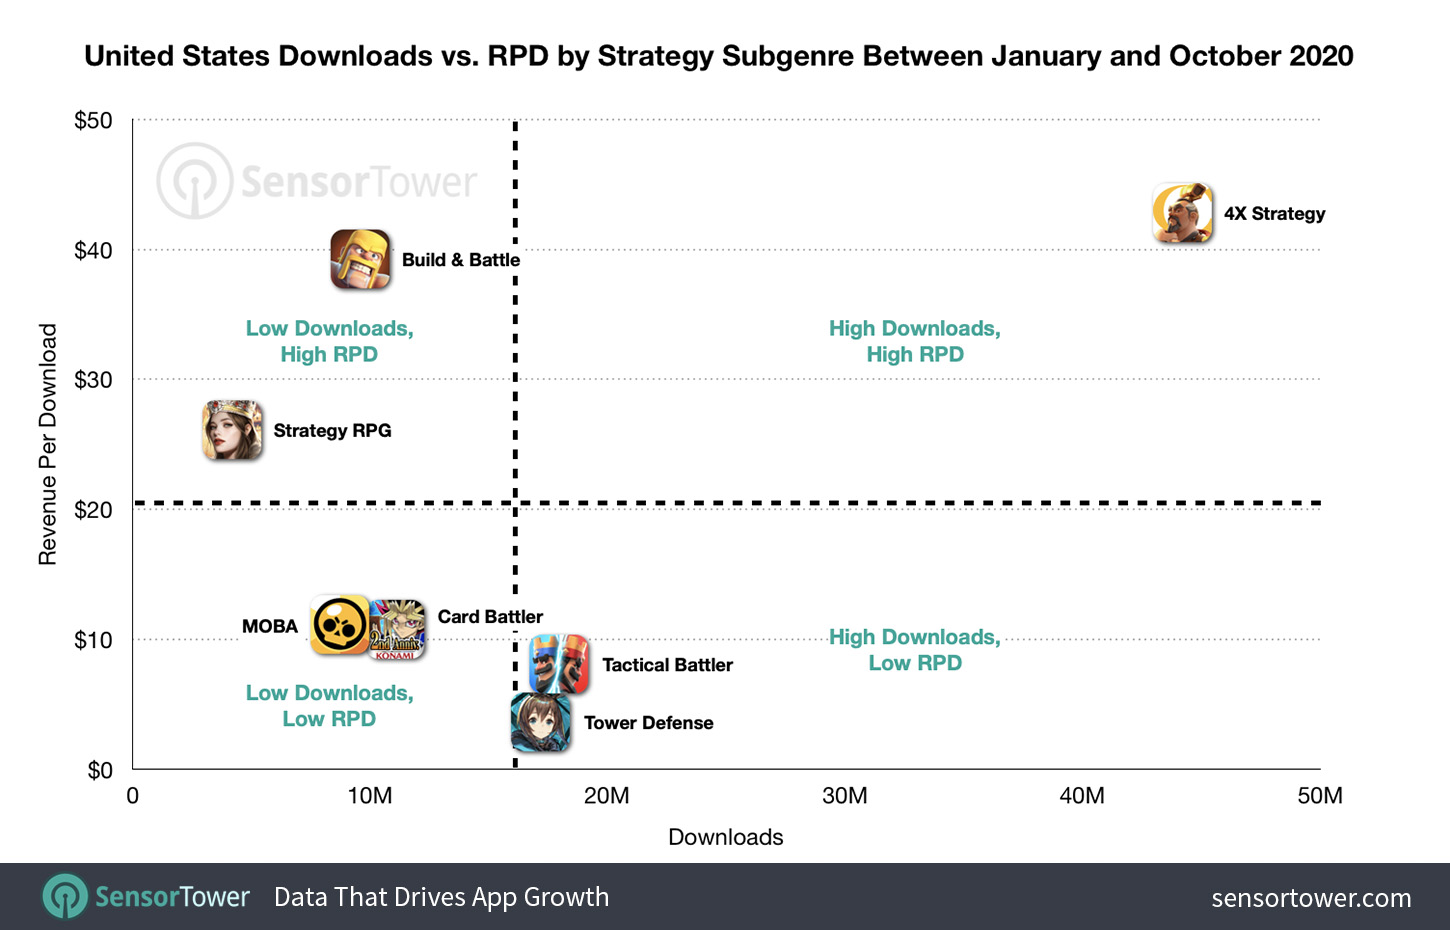 U.S. Downloads Vs. RPD by Strategy Subgenre Between January and October 2020